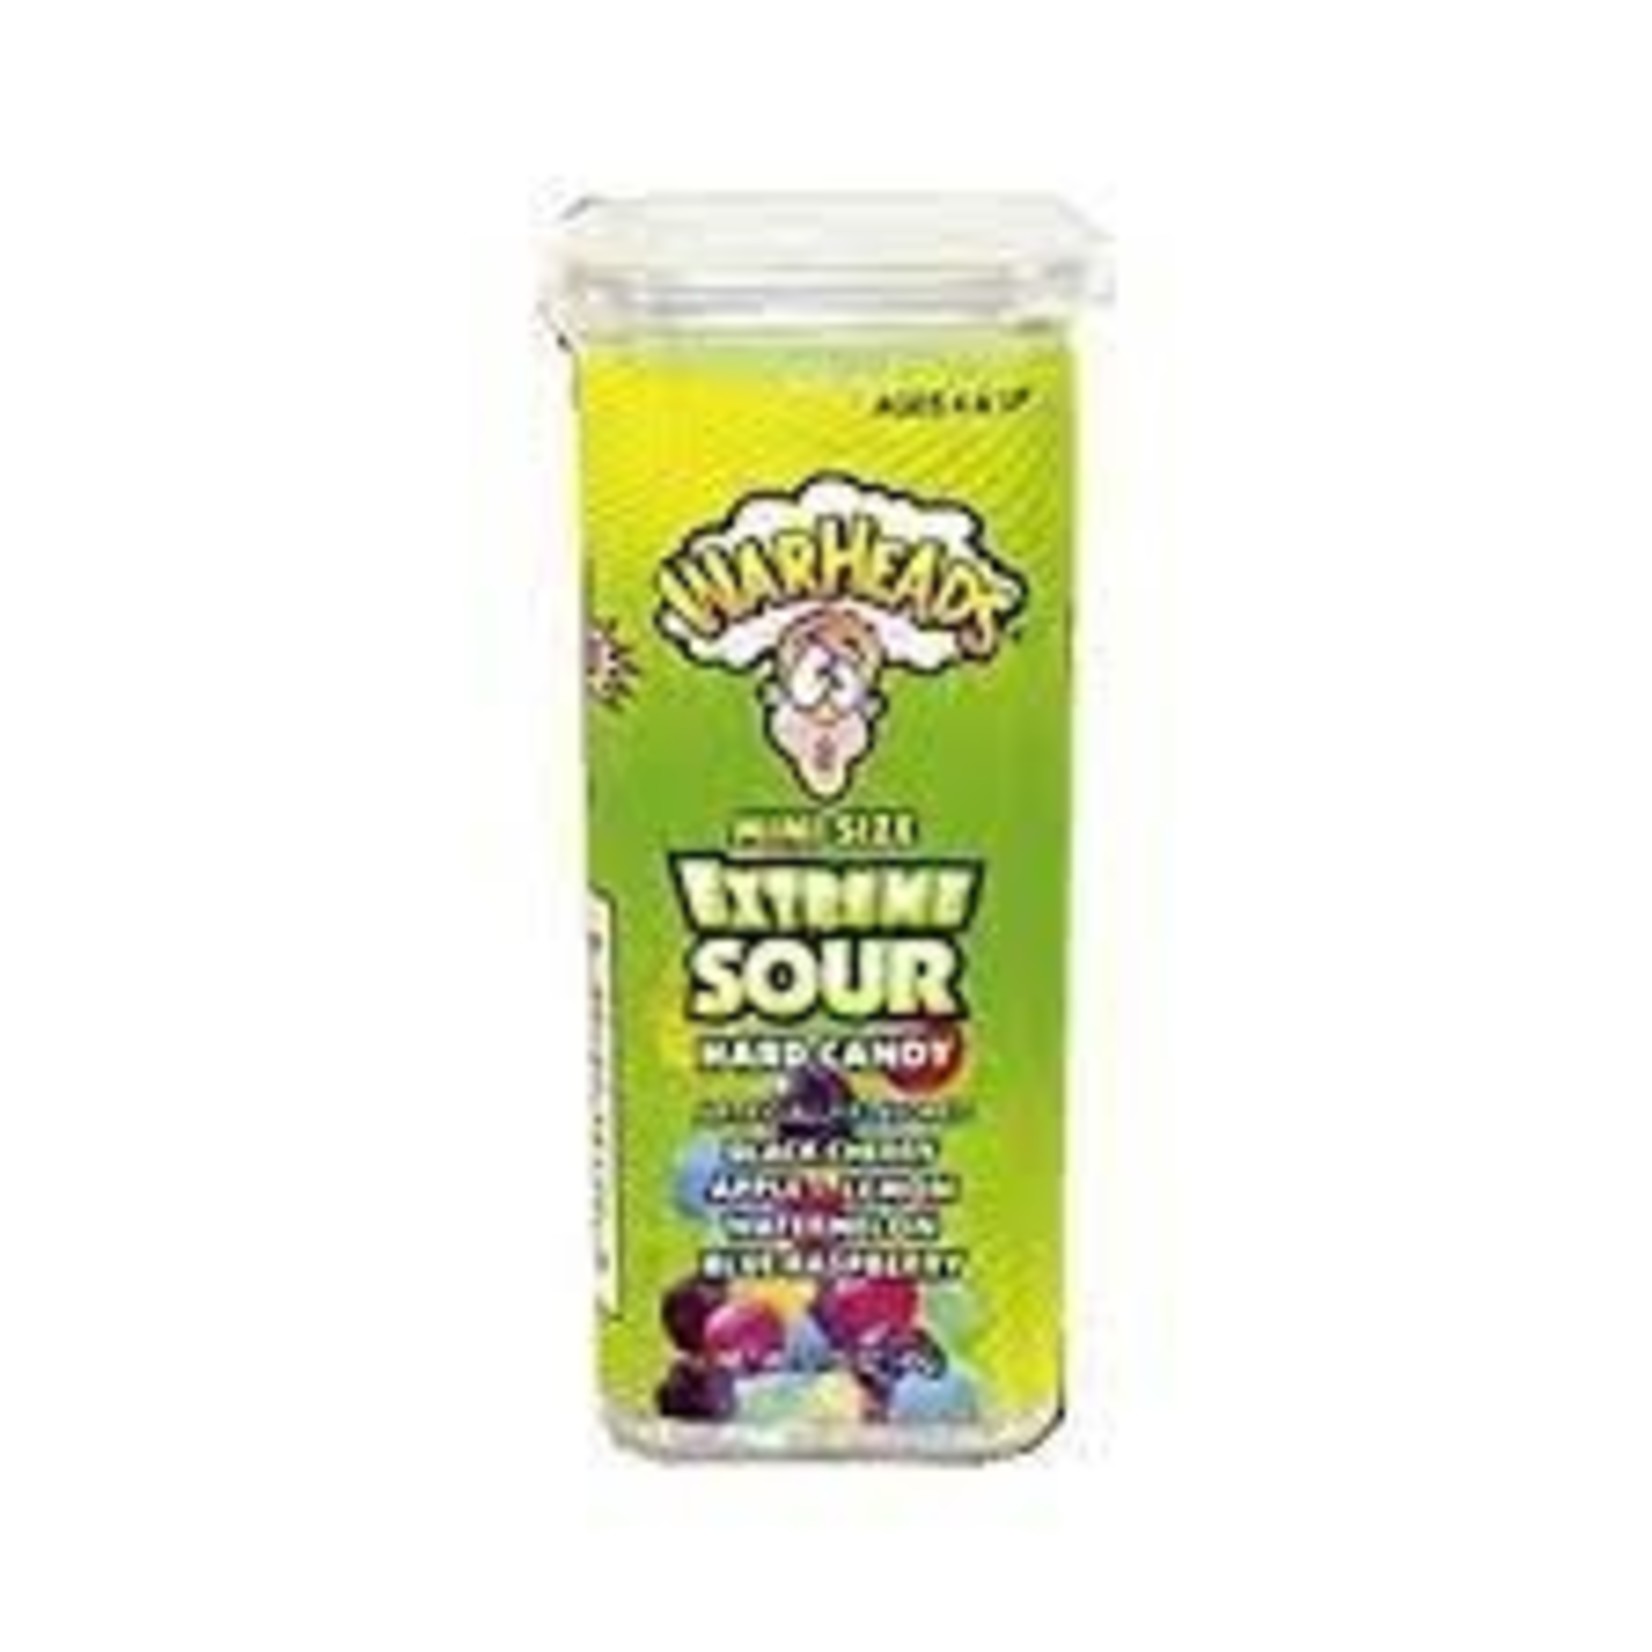 Warheads Extreme Sour Minis Hard Candy